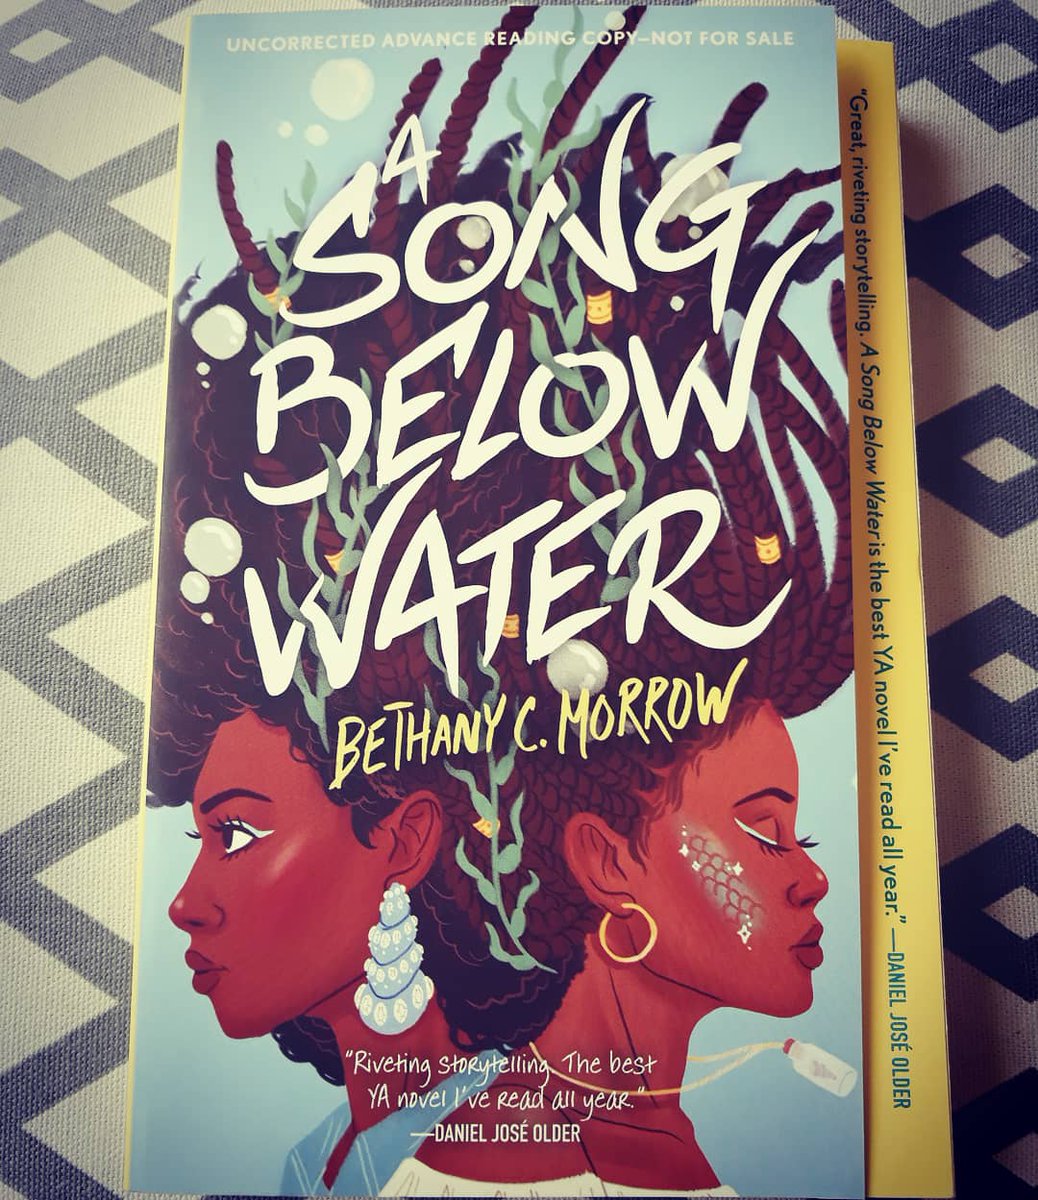 Raise up Black authors! 🖤 Released today: A SONG BELOW WATER by Bethany C. Morrow
YA fantasy/speculative fict novel abt Black sirens & Black mermaids finding their voice through friendship & hope & strength 📚💜 #readwomen #readBlackauthors #ireadya #BlackLivesMatter